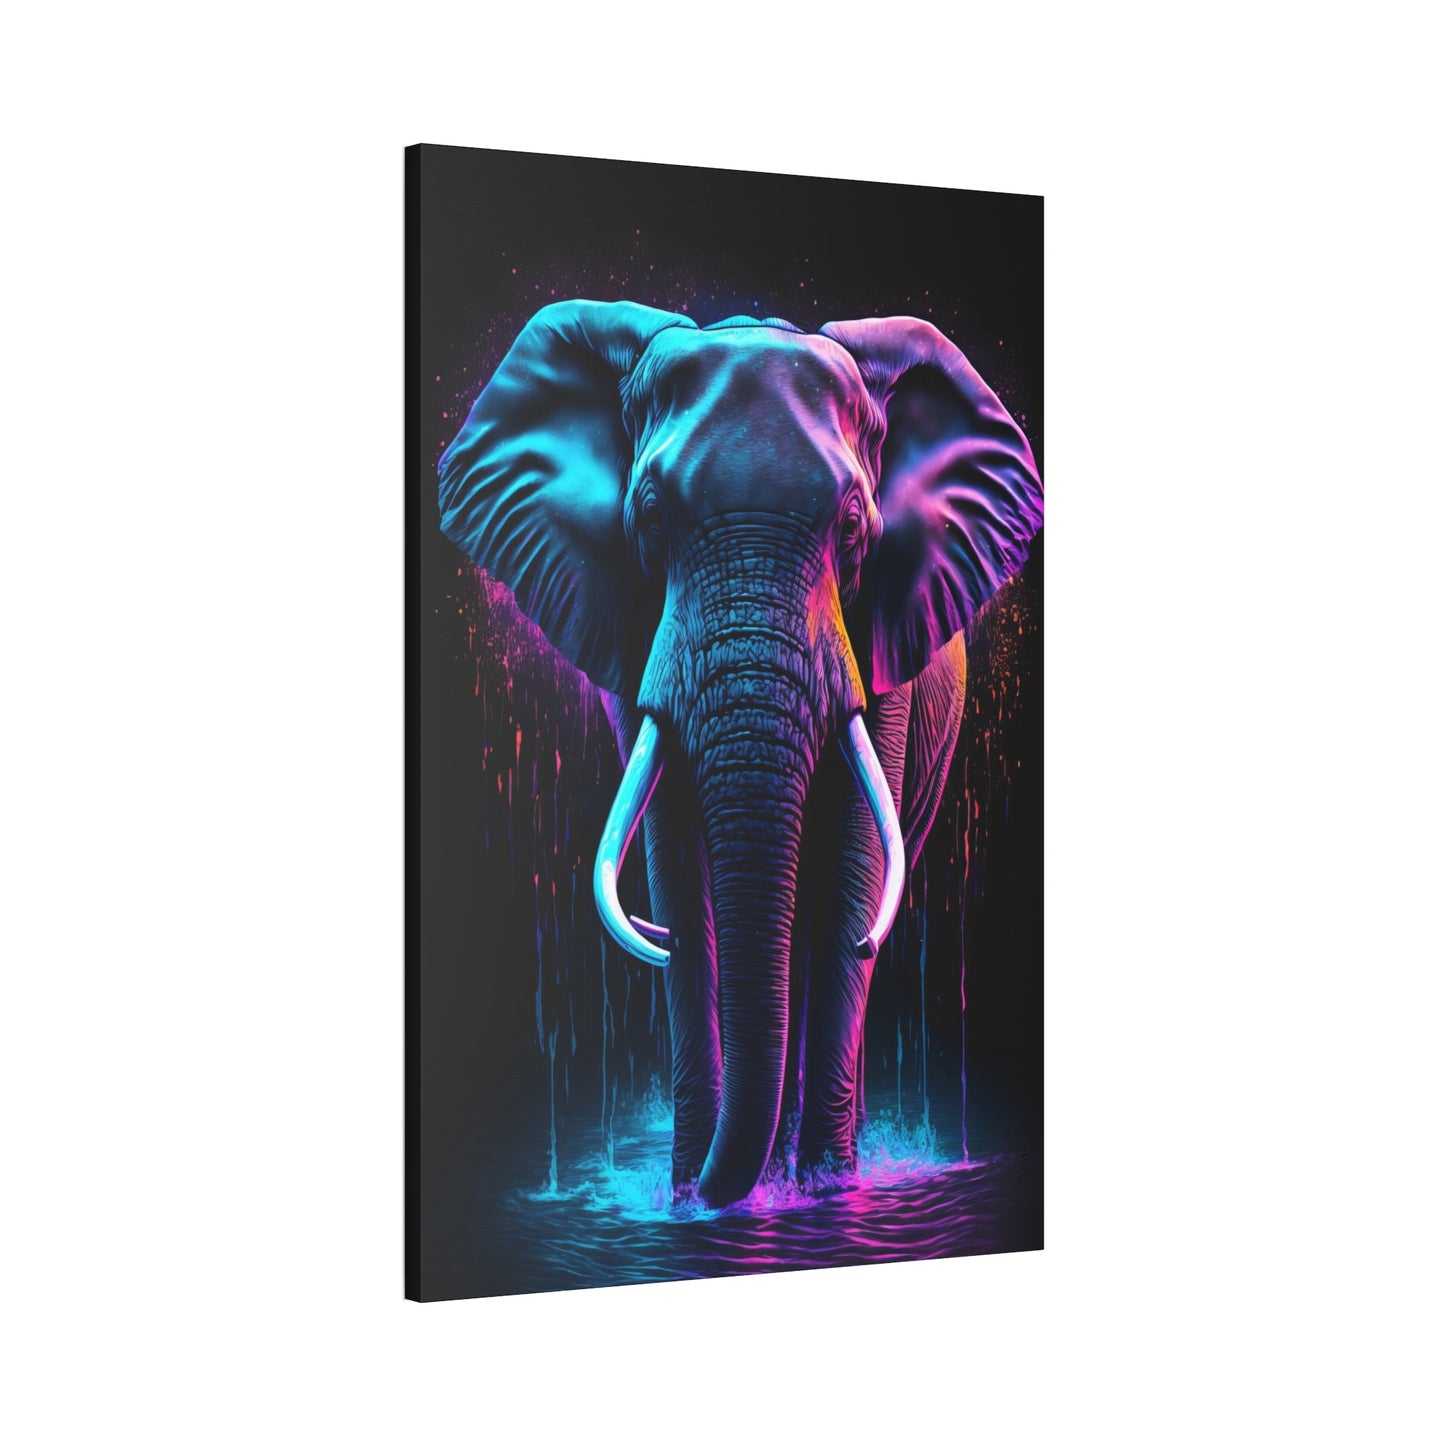 Elephant Elegance: Natural Canvas Wall Art for the Home